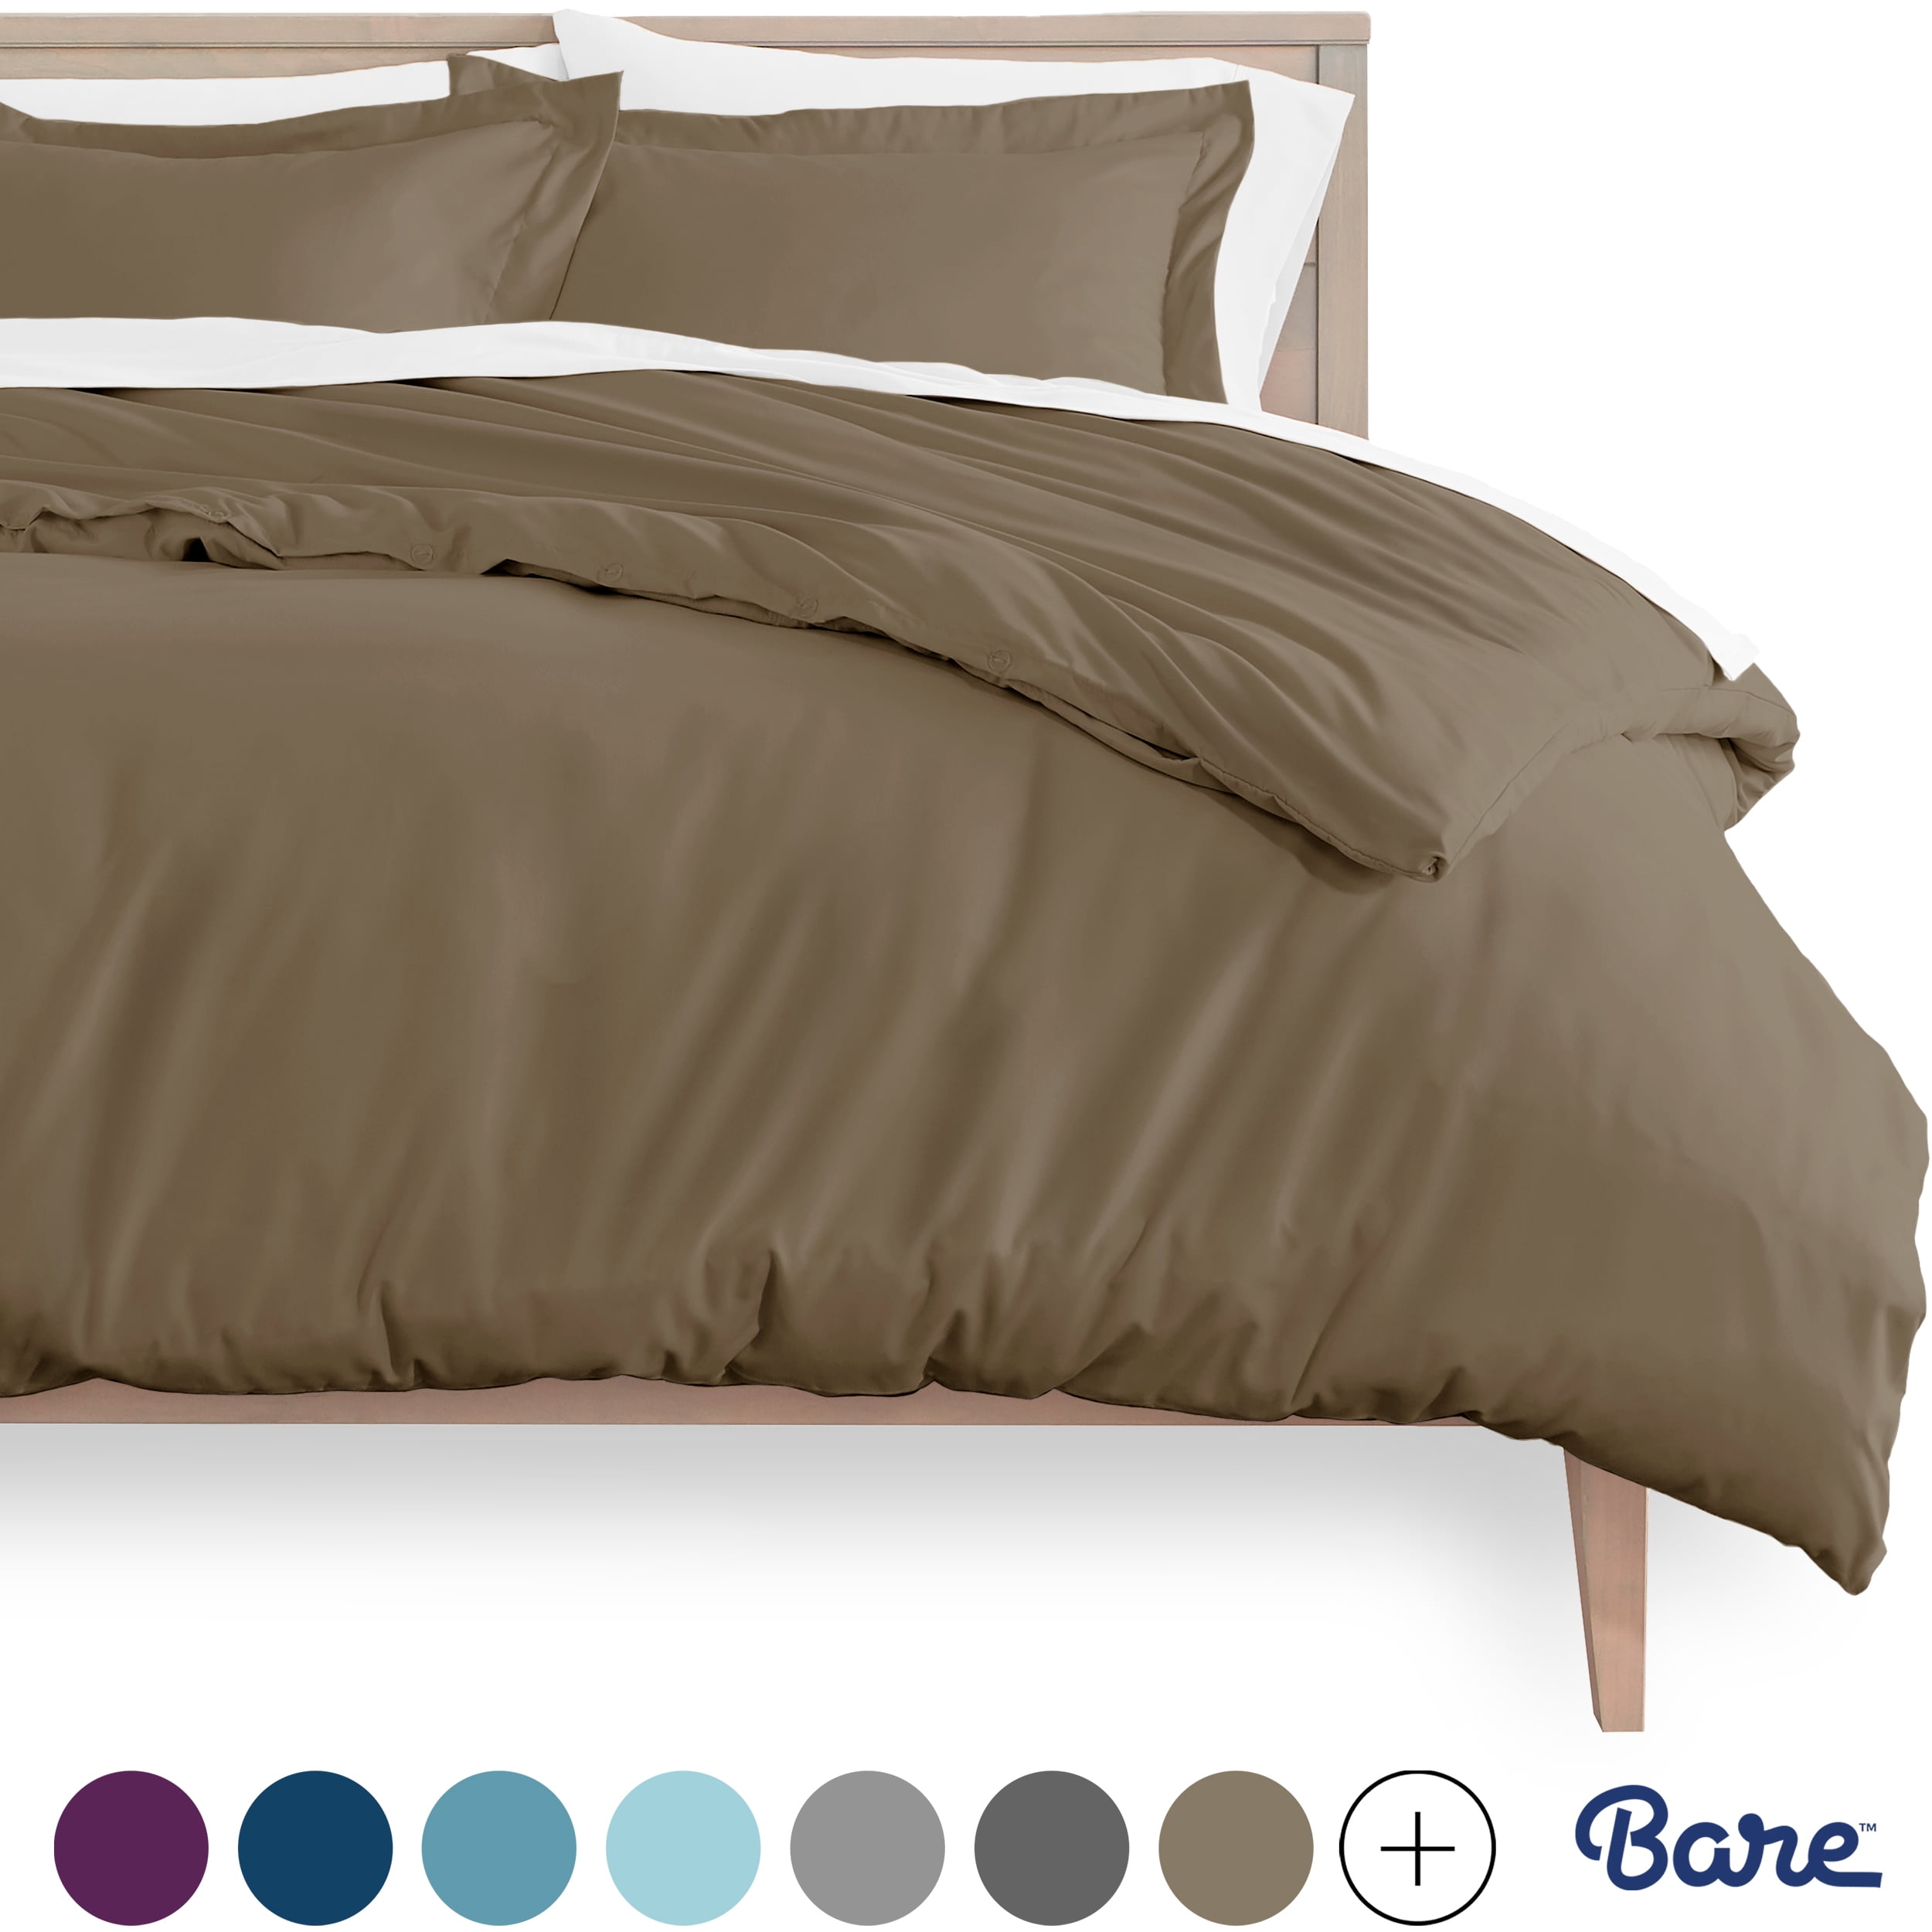 Better Home Style 3 Piece Luxury Lush Soft Taupe Burgundy Full Queen, 